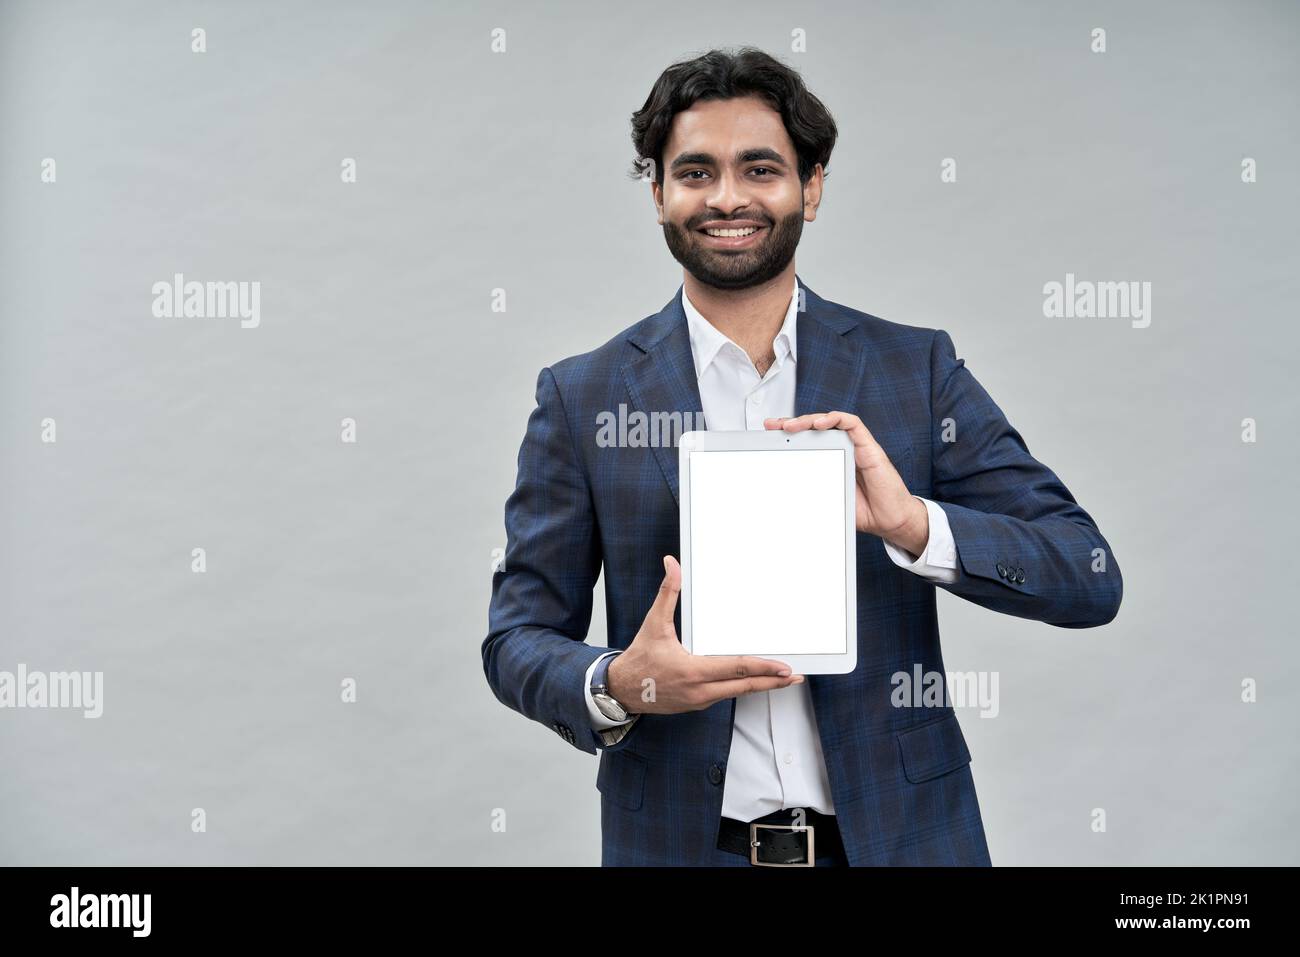 Smiling indian business manager wearing suit showing digital tablet mockup. Stock Photo